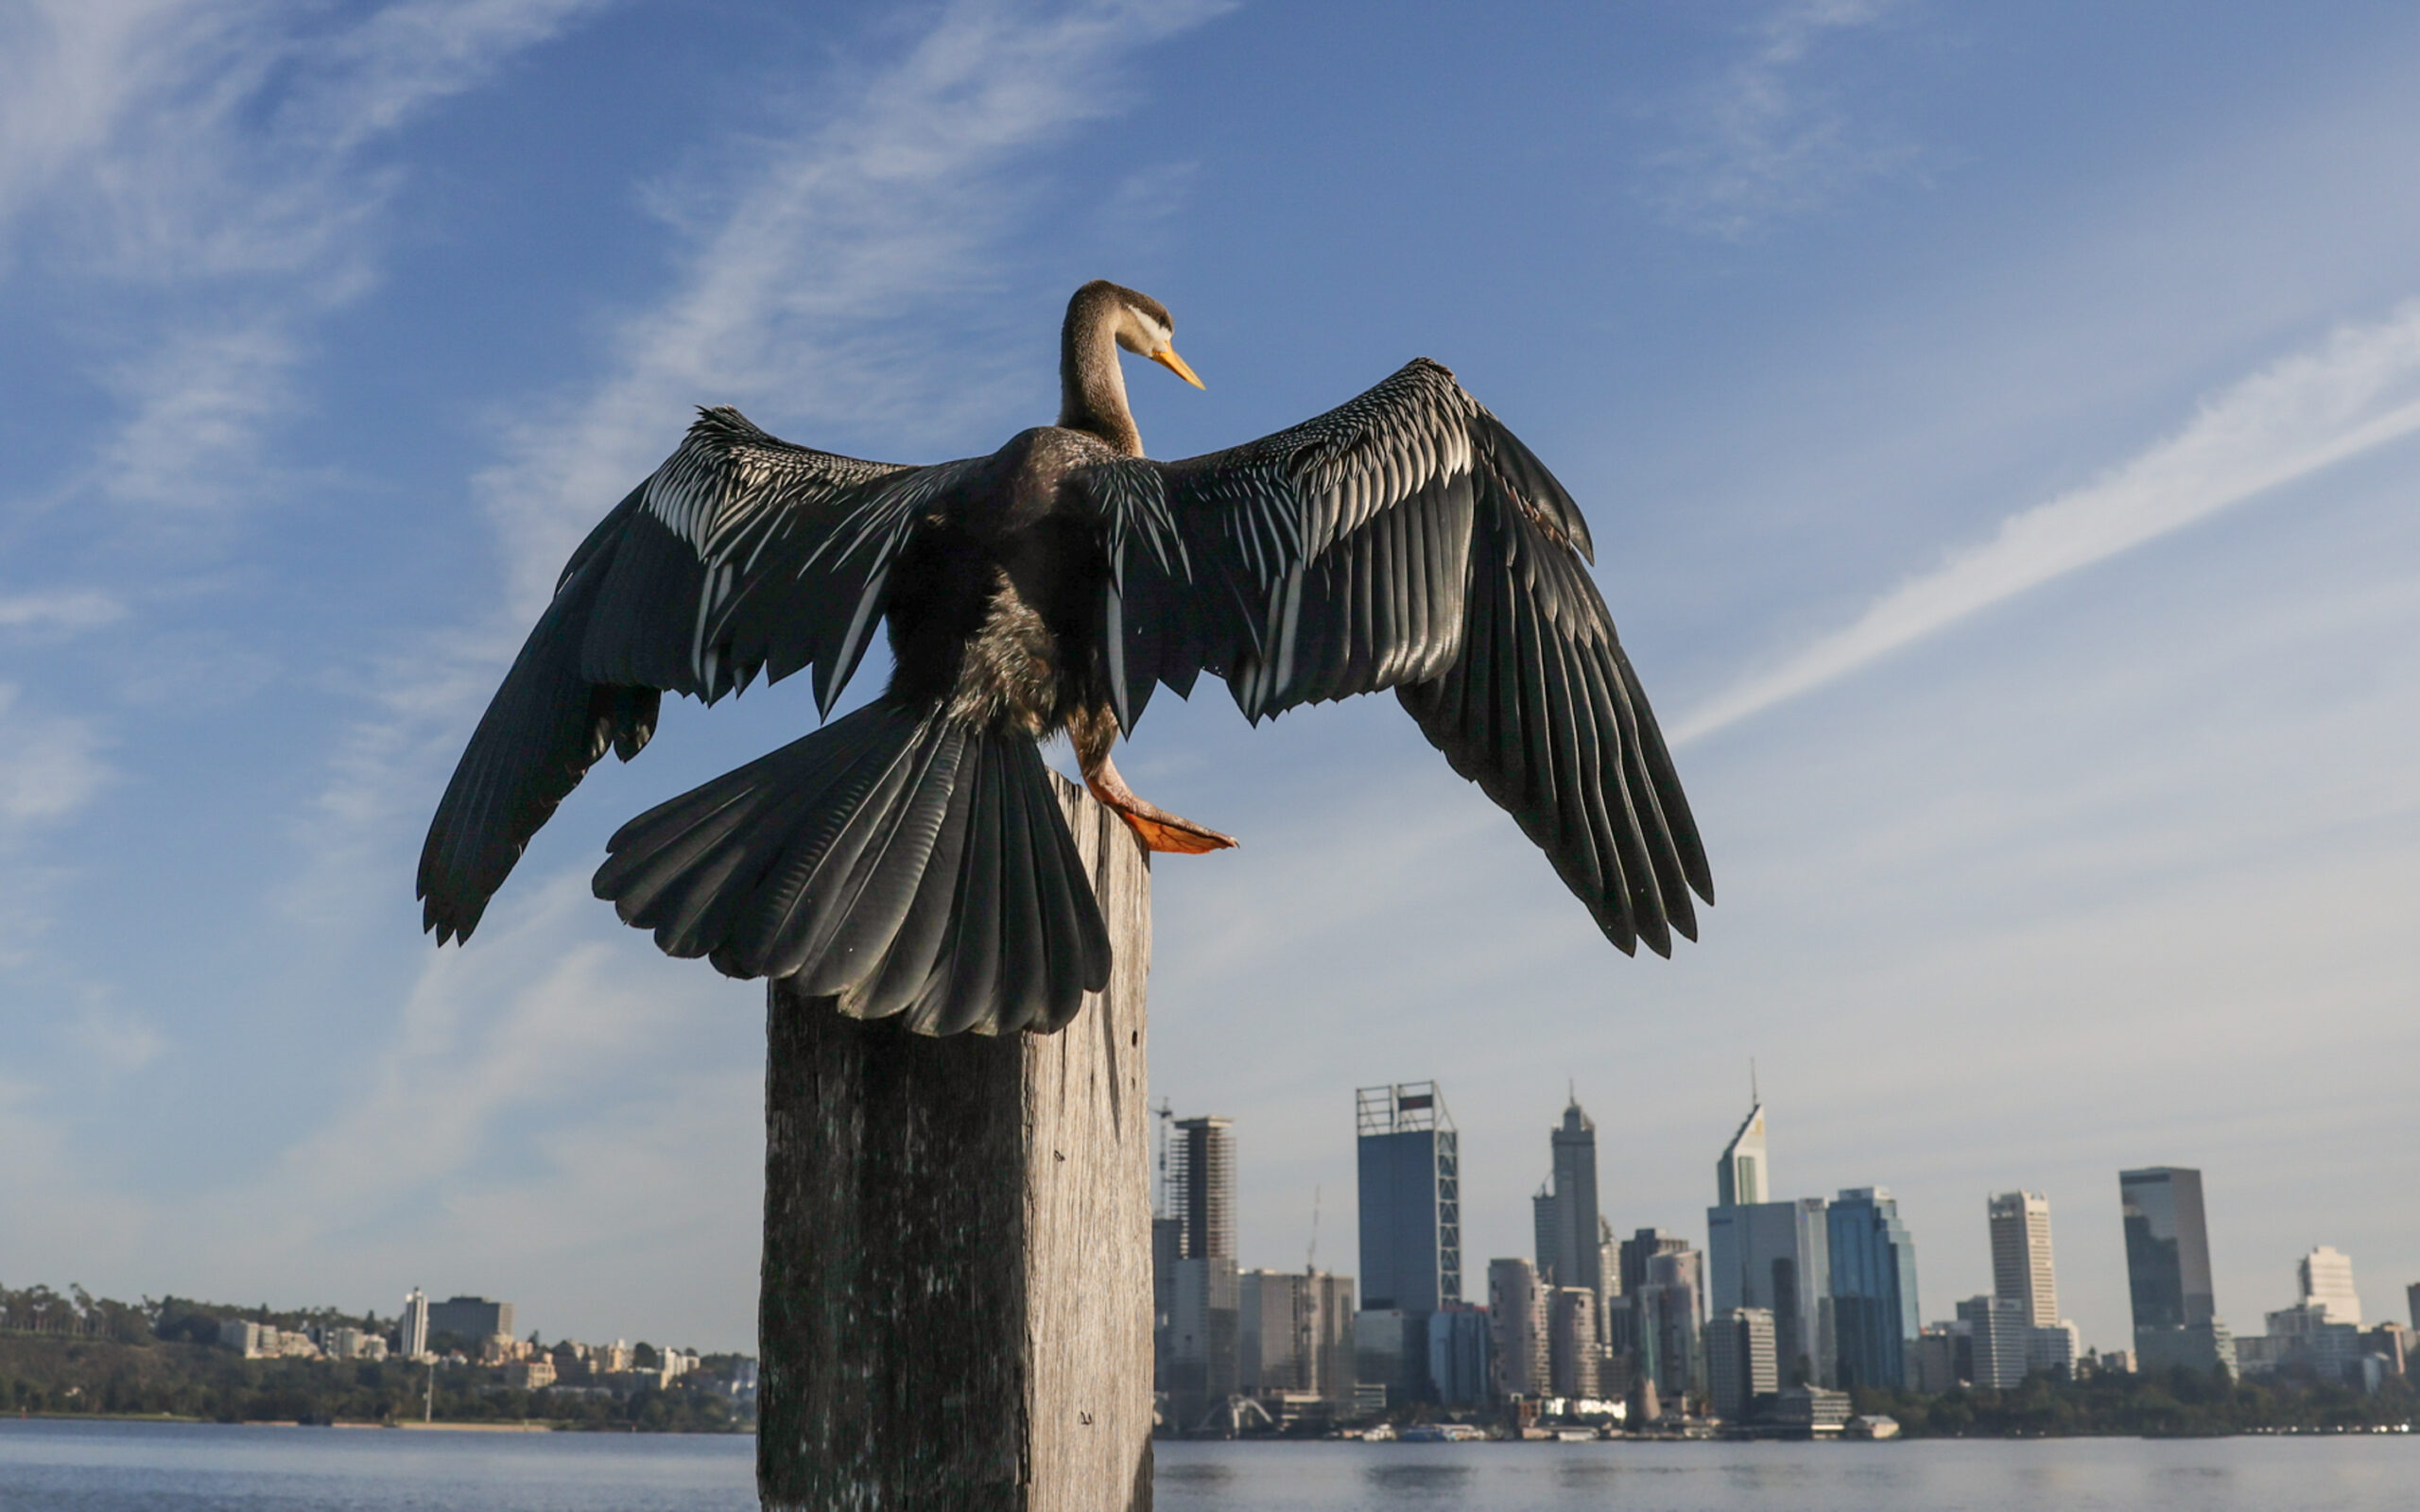 A female Australasian Darter is perched, back to us, on a wooden post with wings outstretched to dry. She is looking out towards a city water view and blue sky with patchy clouds.